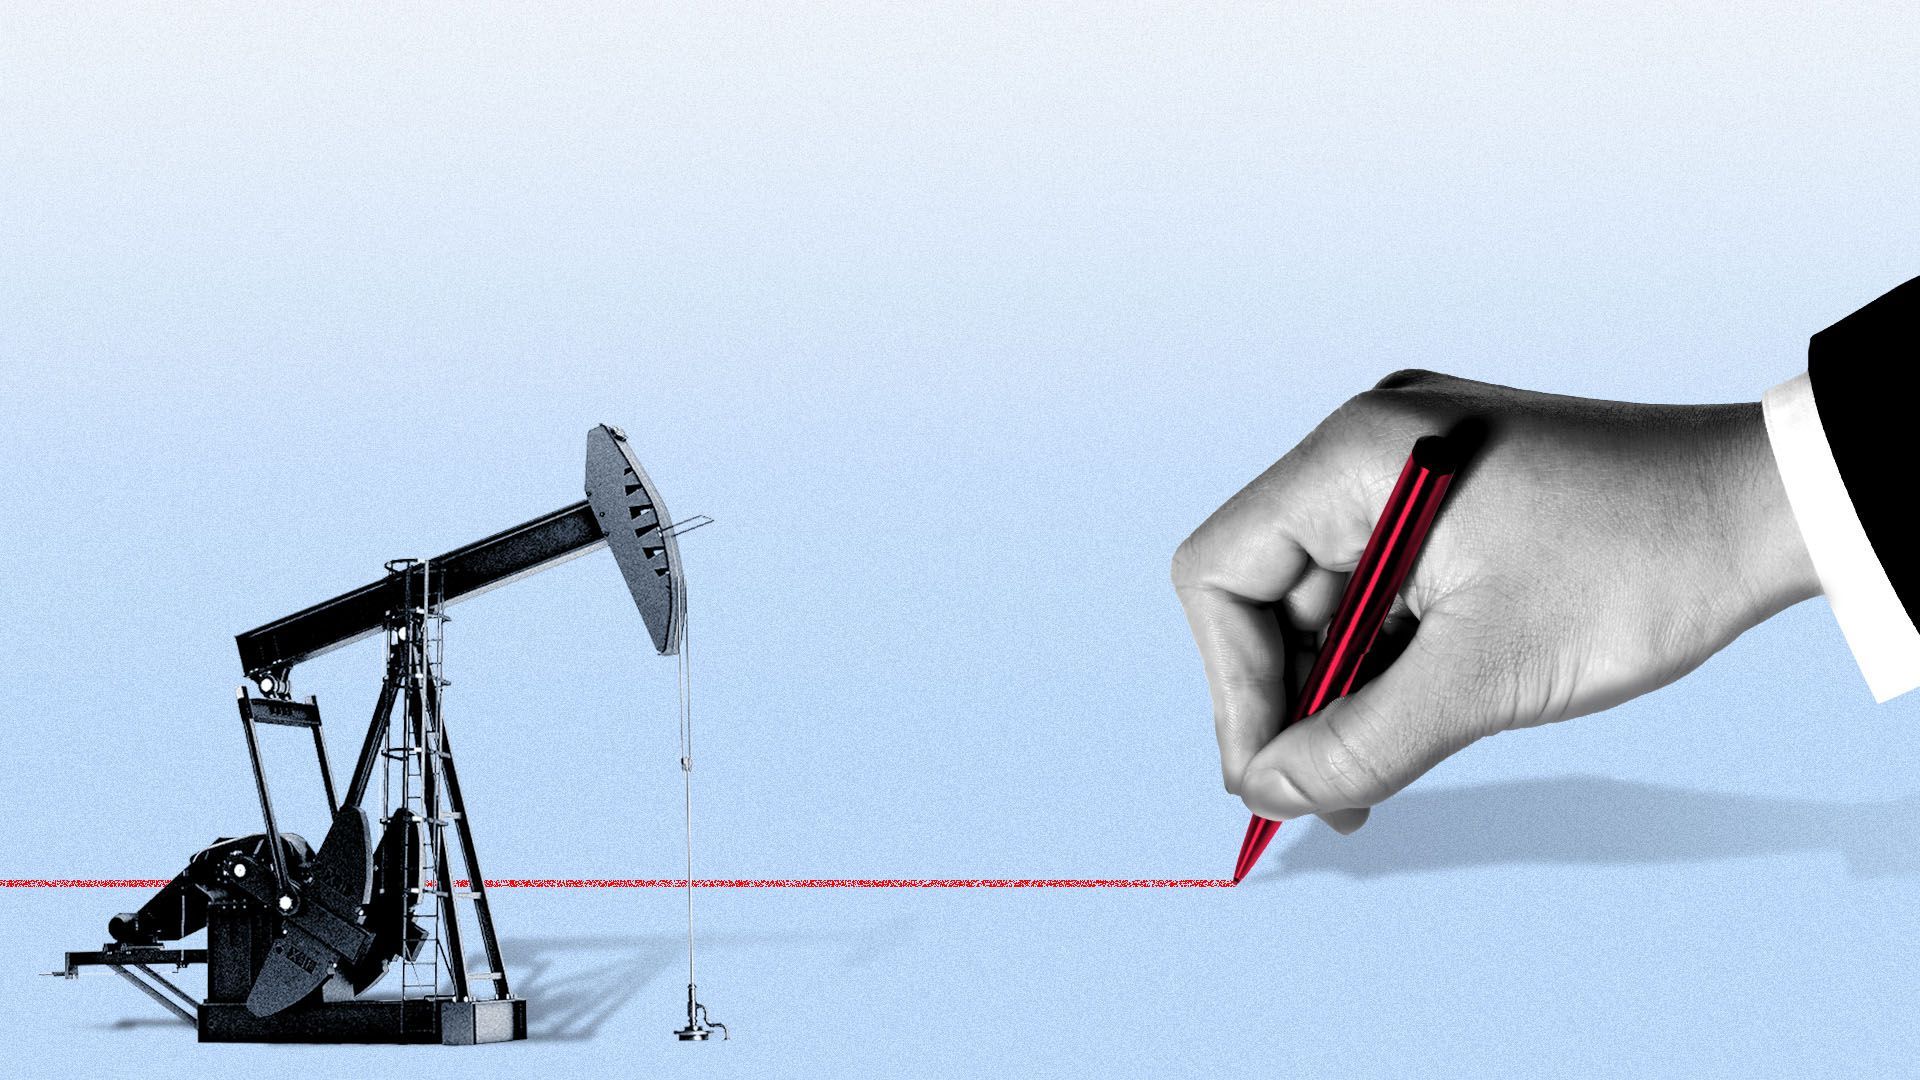 Illustration of a hand in a business suit drawing a red line in front of an oil rig